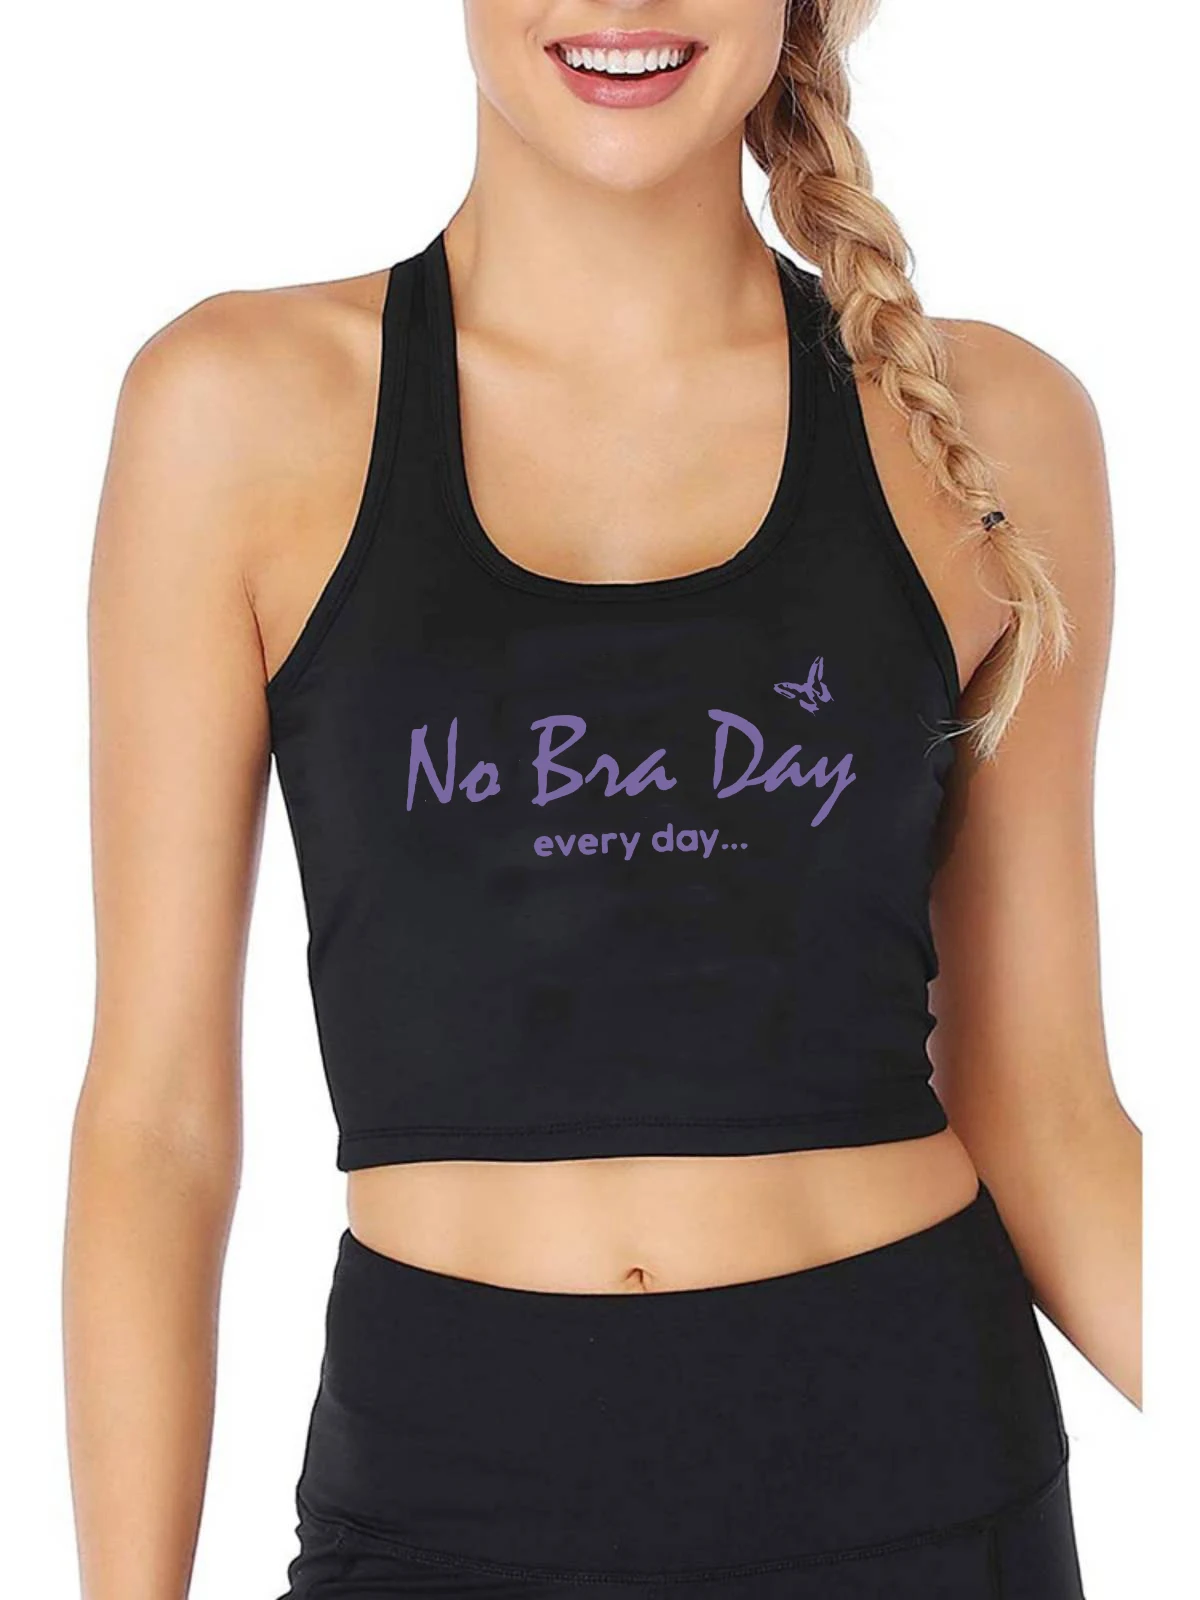 

Every Day Is No Bra Day Design Sexy Slim Fit Crop Top Hotwife Humorous Flirtation Style Tank Tops Feminist Fitness Camisole